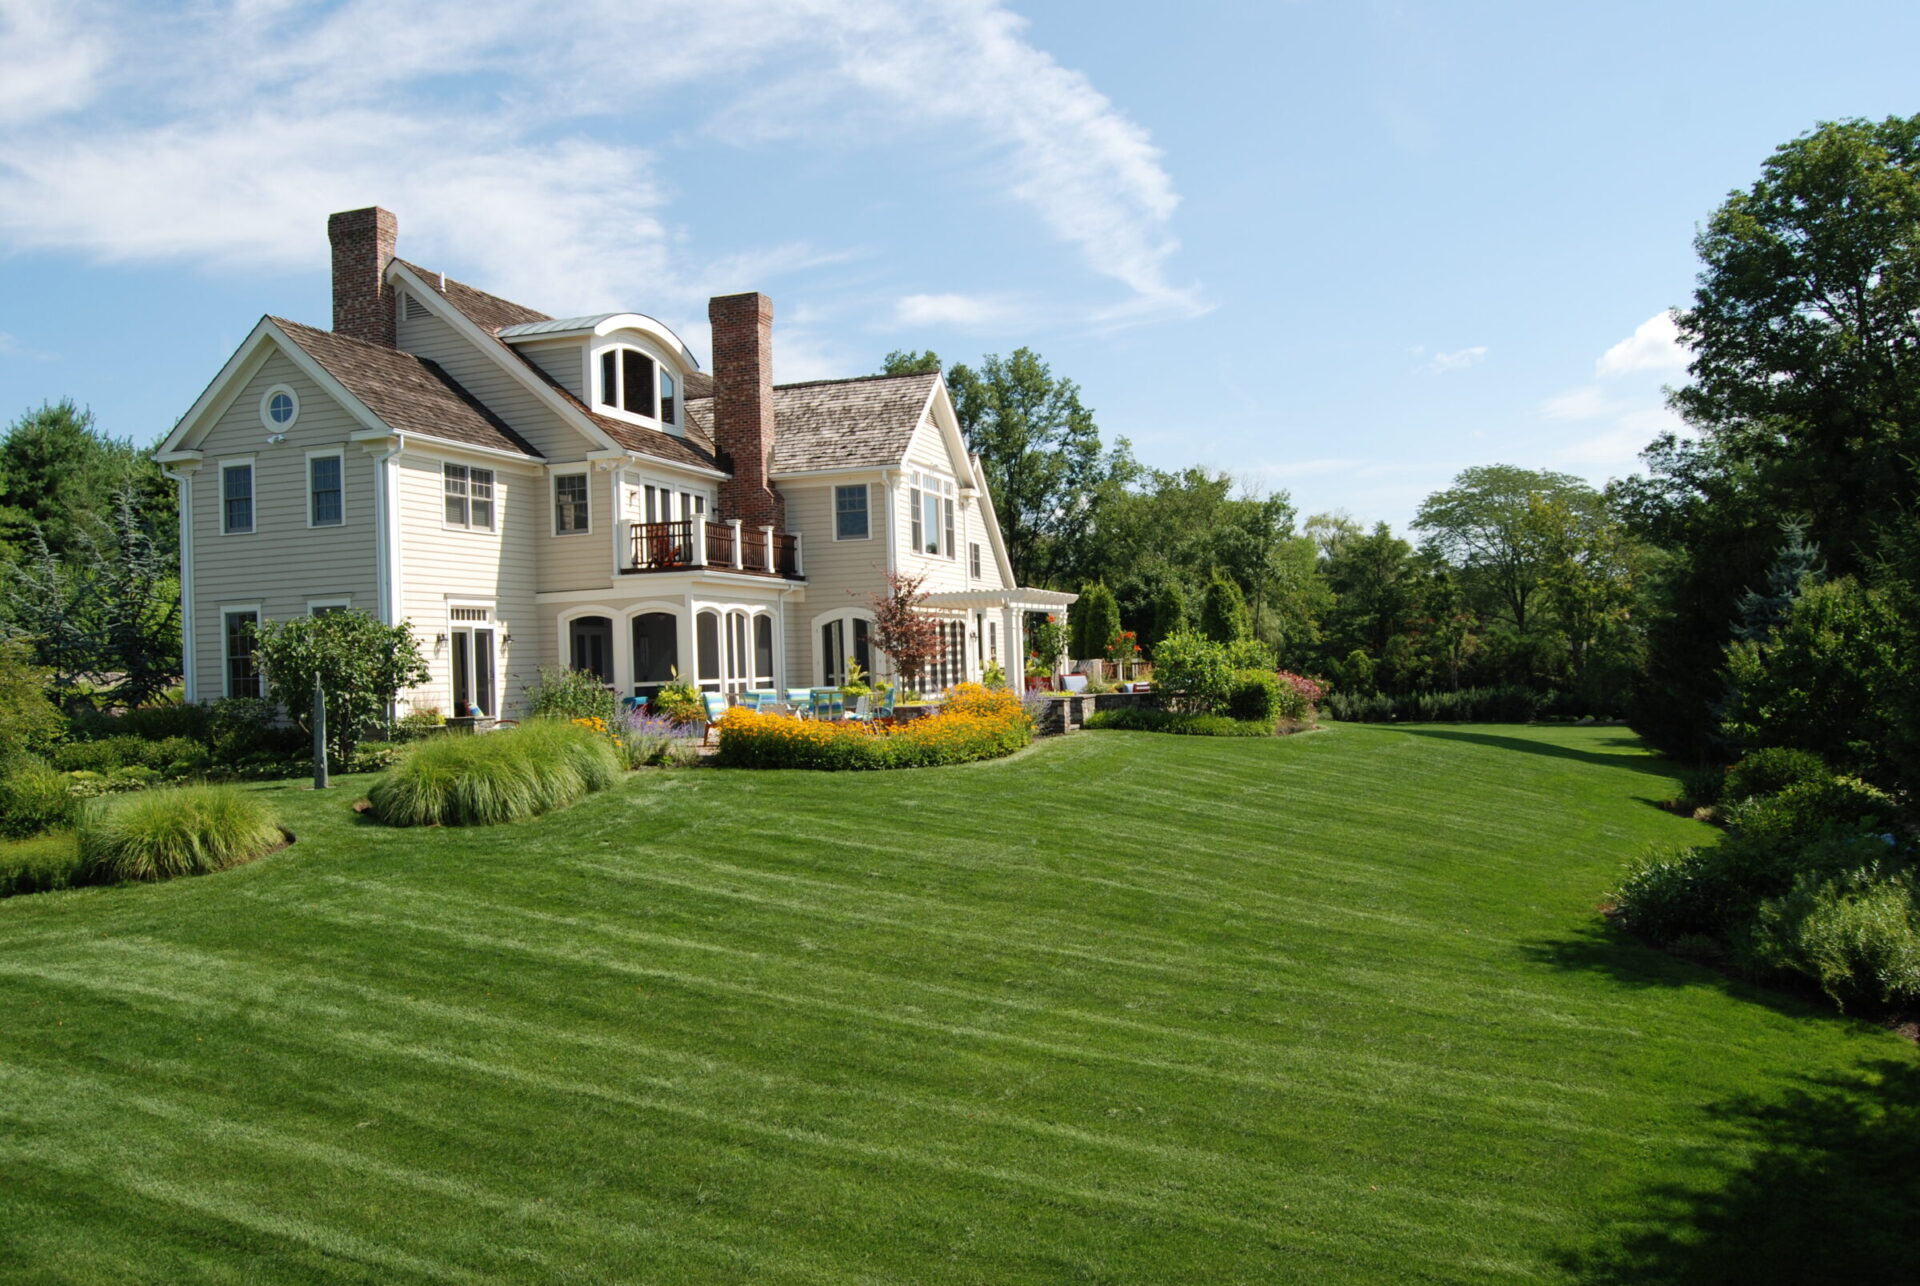 A large, elegant two-story house with a well-manicured lawn, surrounded by lush landscaping, under a clear blue sky.